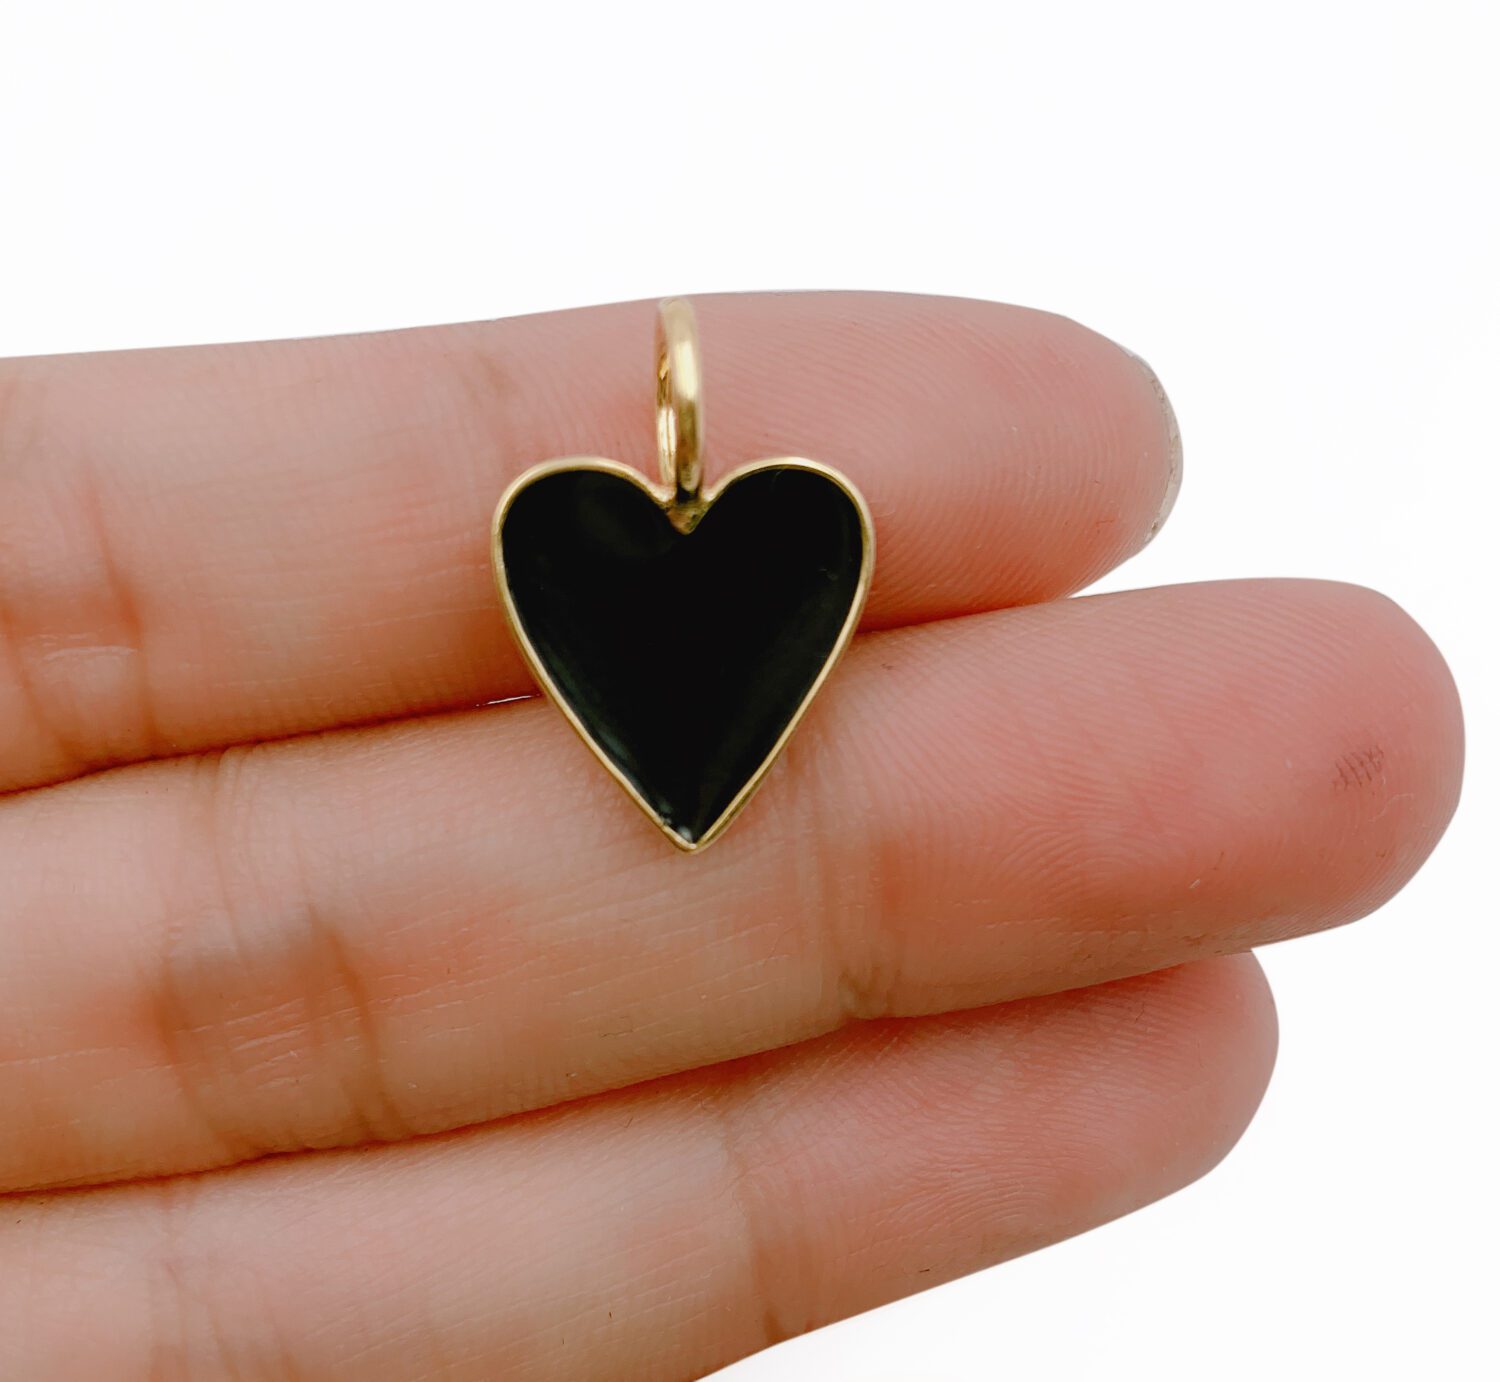 Black Heart Charms - Puffy Black Heart Pendants - Enamel Charms for Keychains - Mother's Day Charms for Jewelry Making - Set of 5